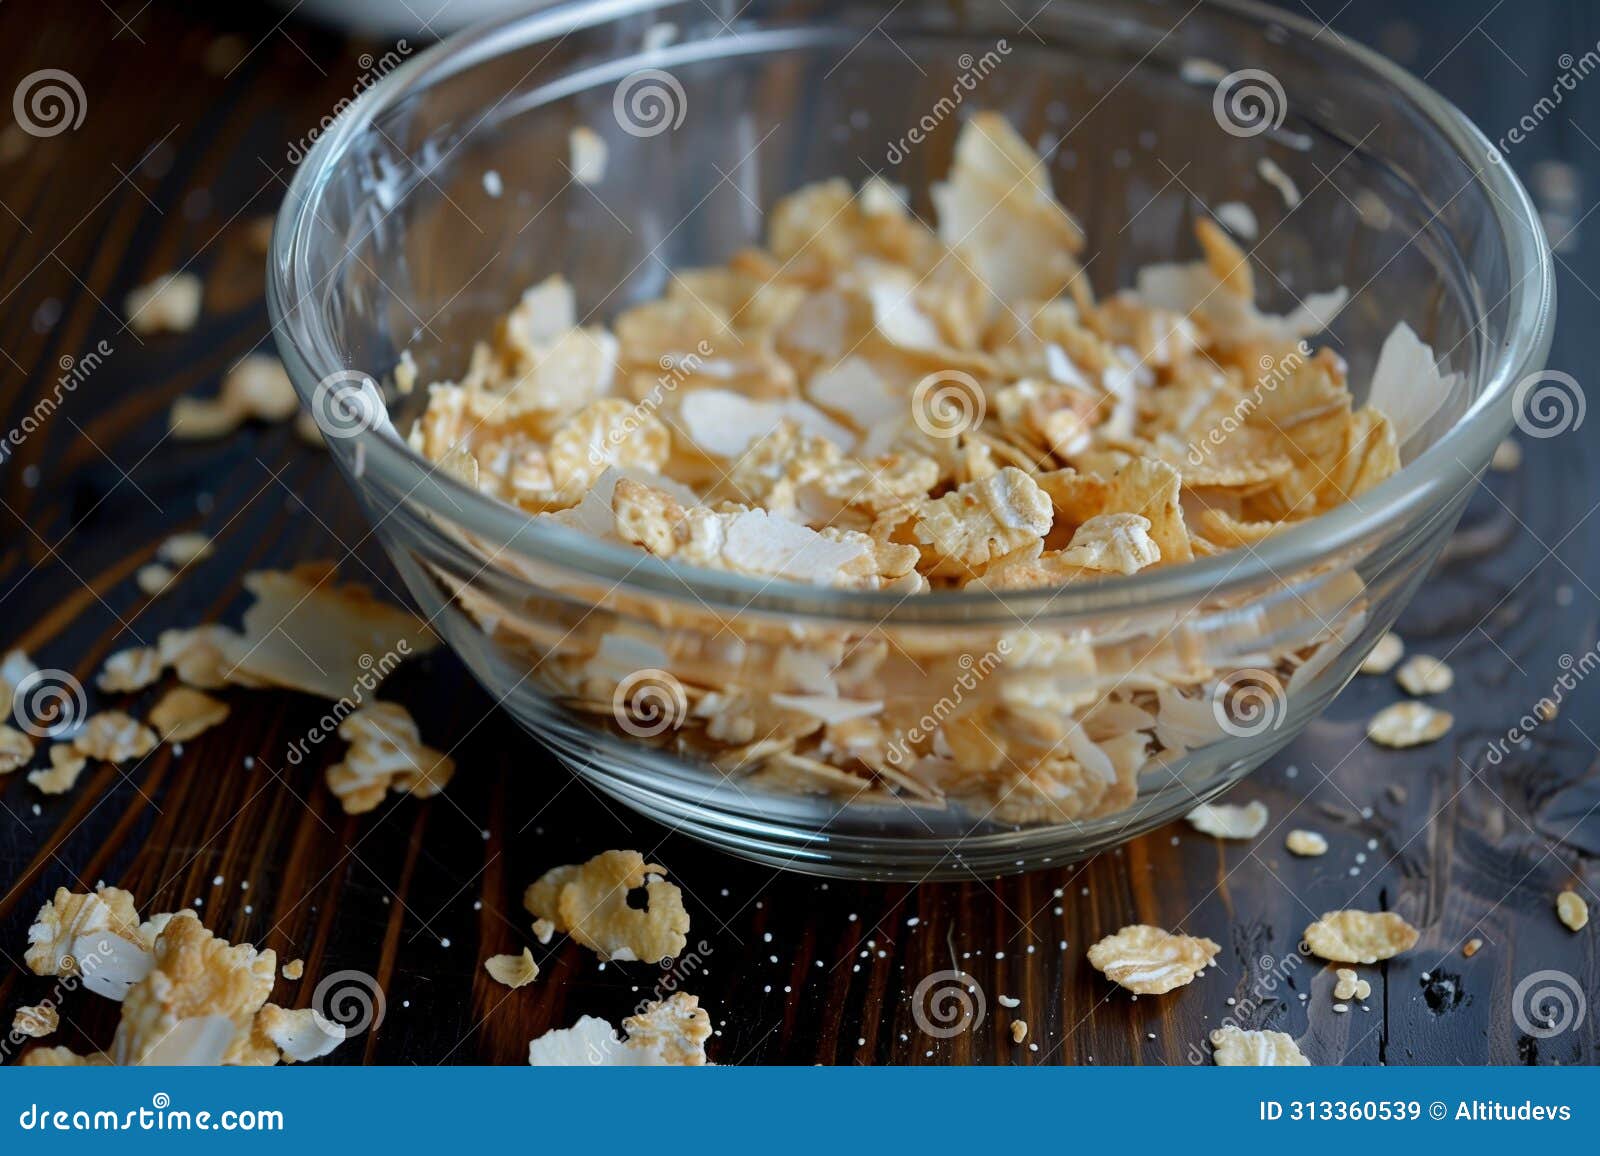 unfinished bowl of cereal with soggy flakes